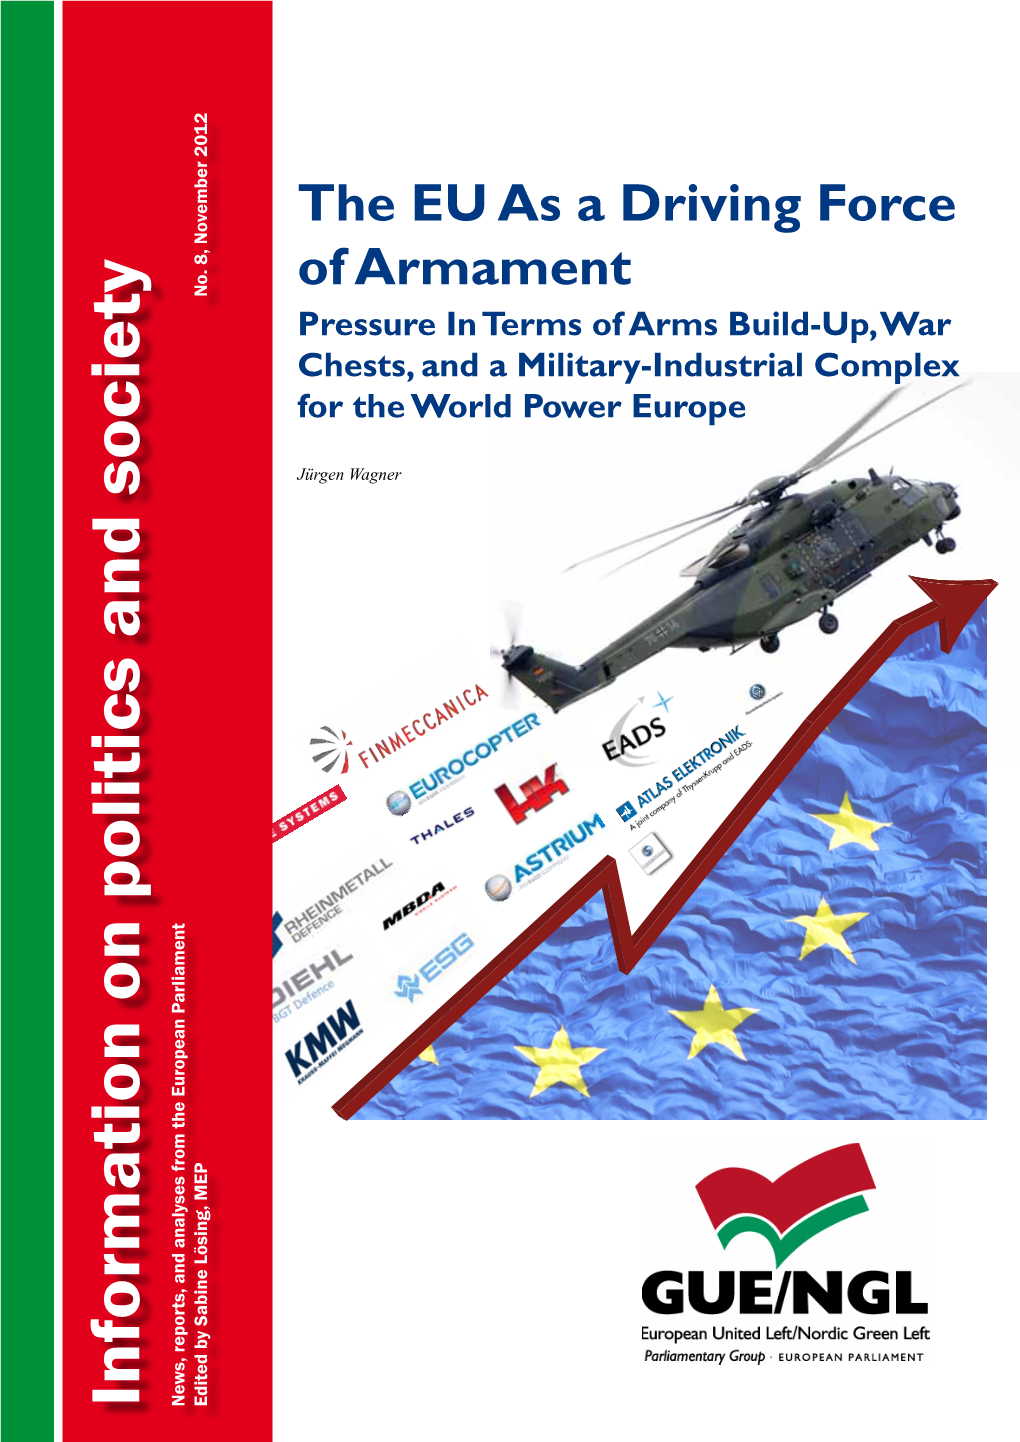 The EU As a Driving Force of Armament